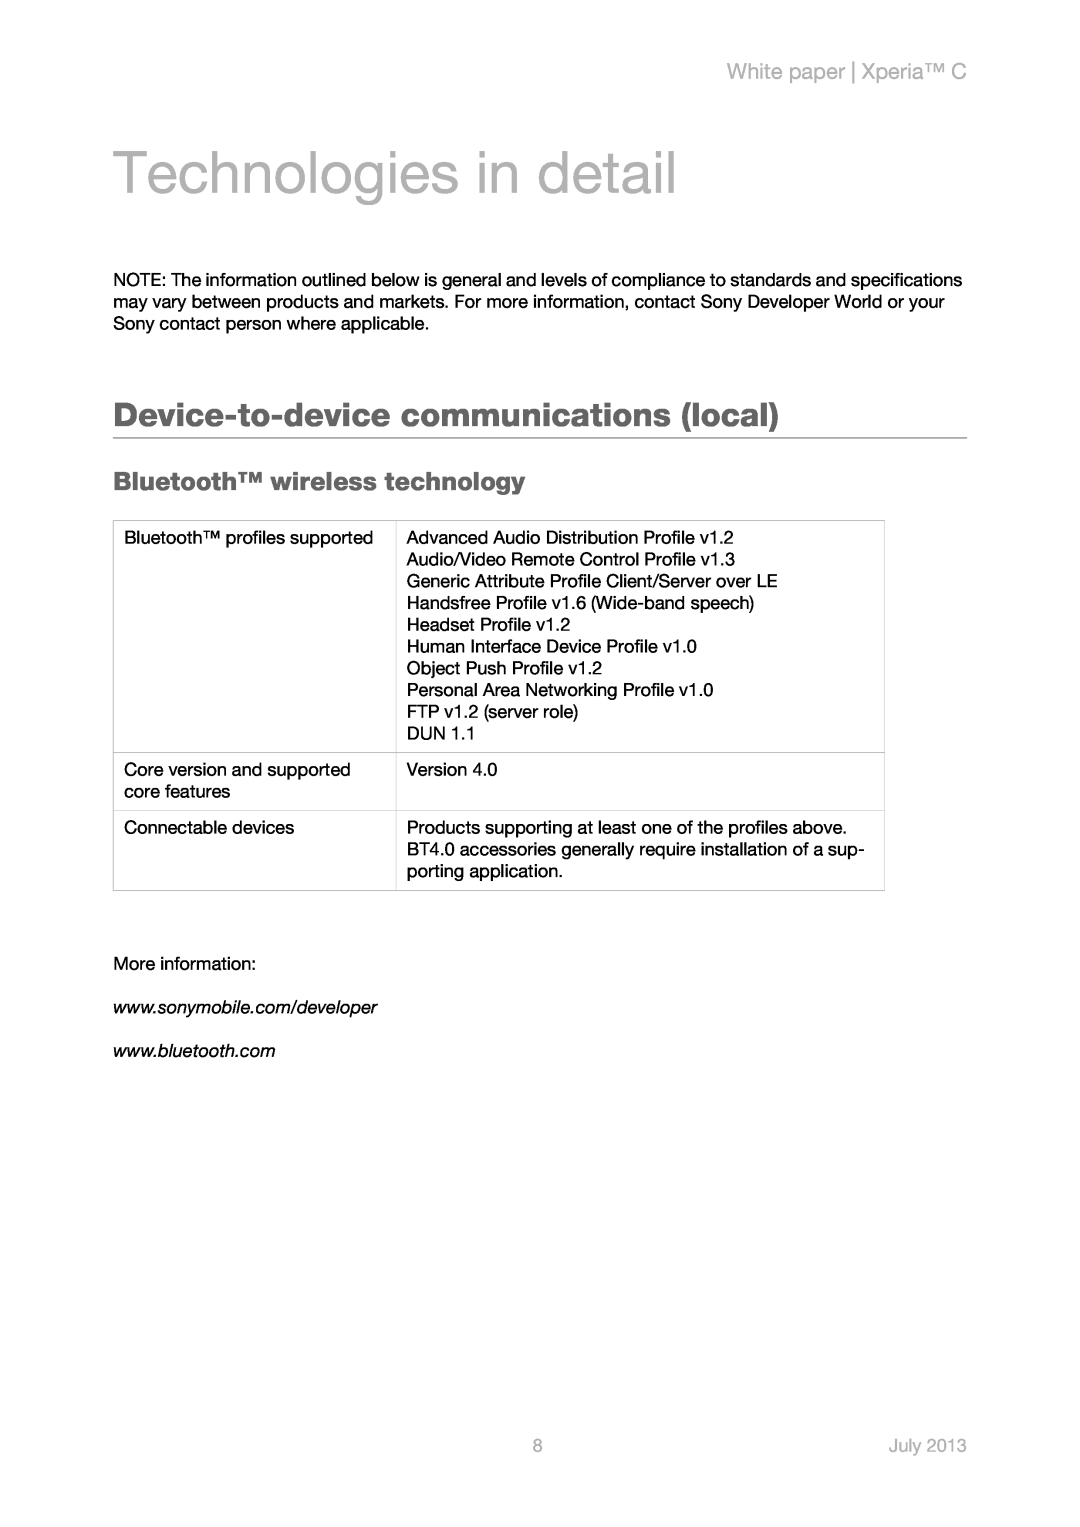 Sony s39h manual Technologies in detail, Device-to-device communications local, Bluetooth wireless technology, July 